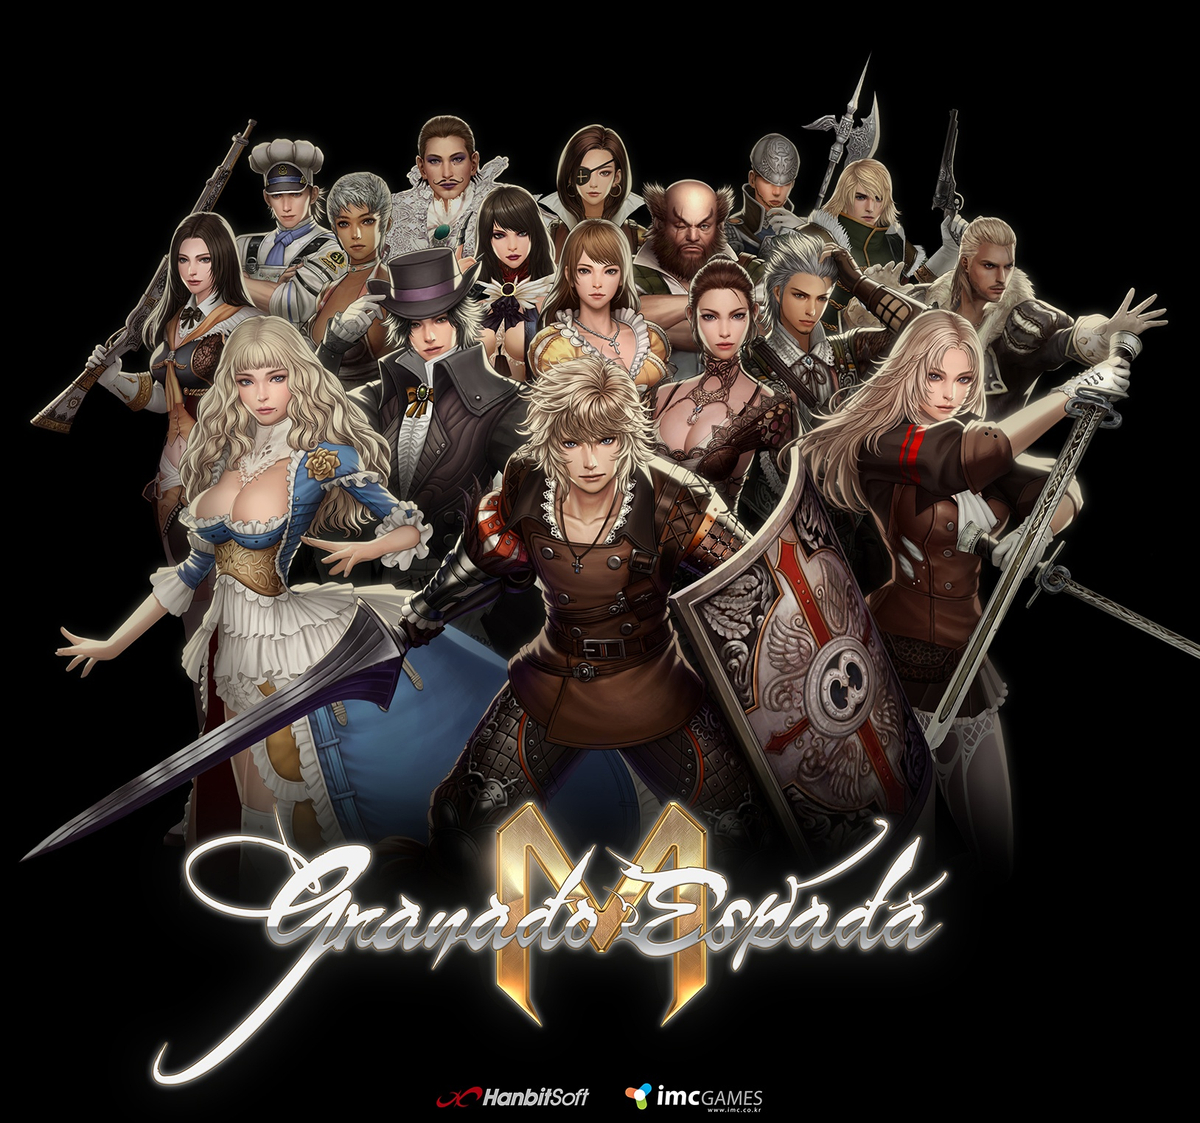 The developers of the mobile MMORPG Granado Espada M shared an illustration of the characters